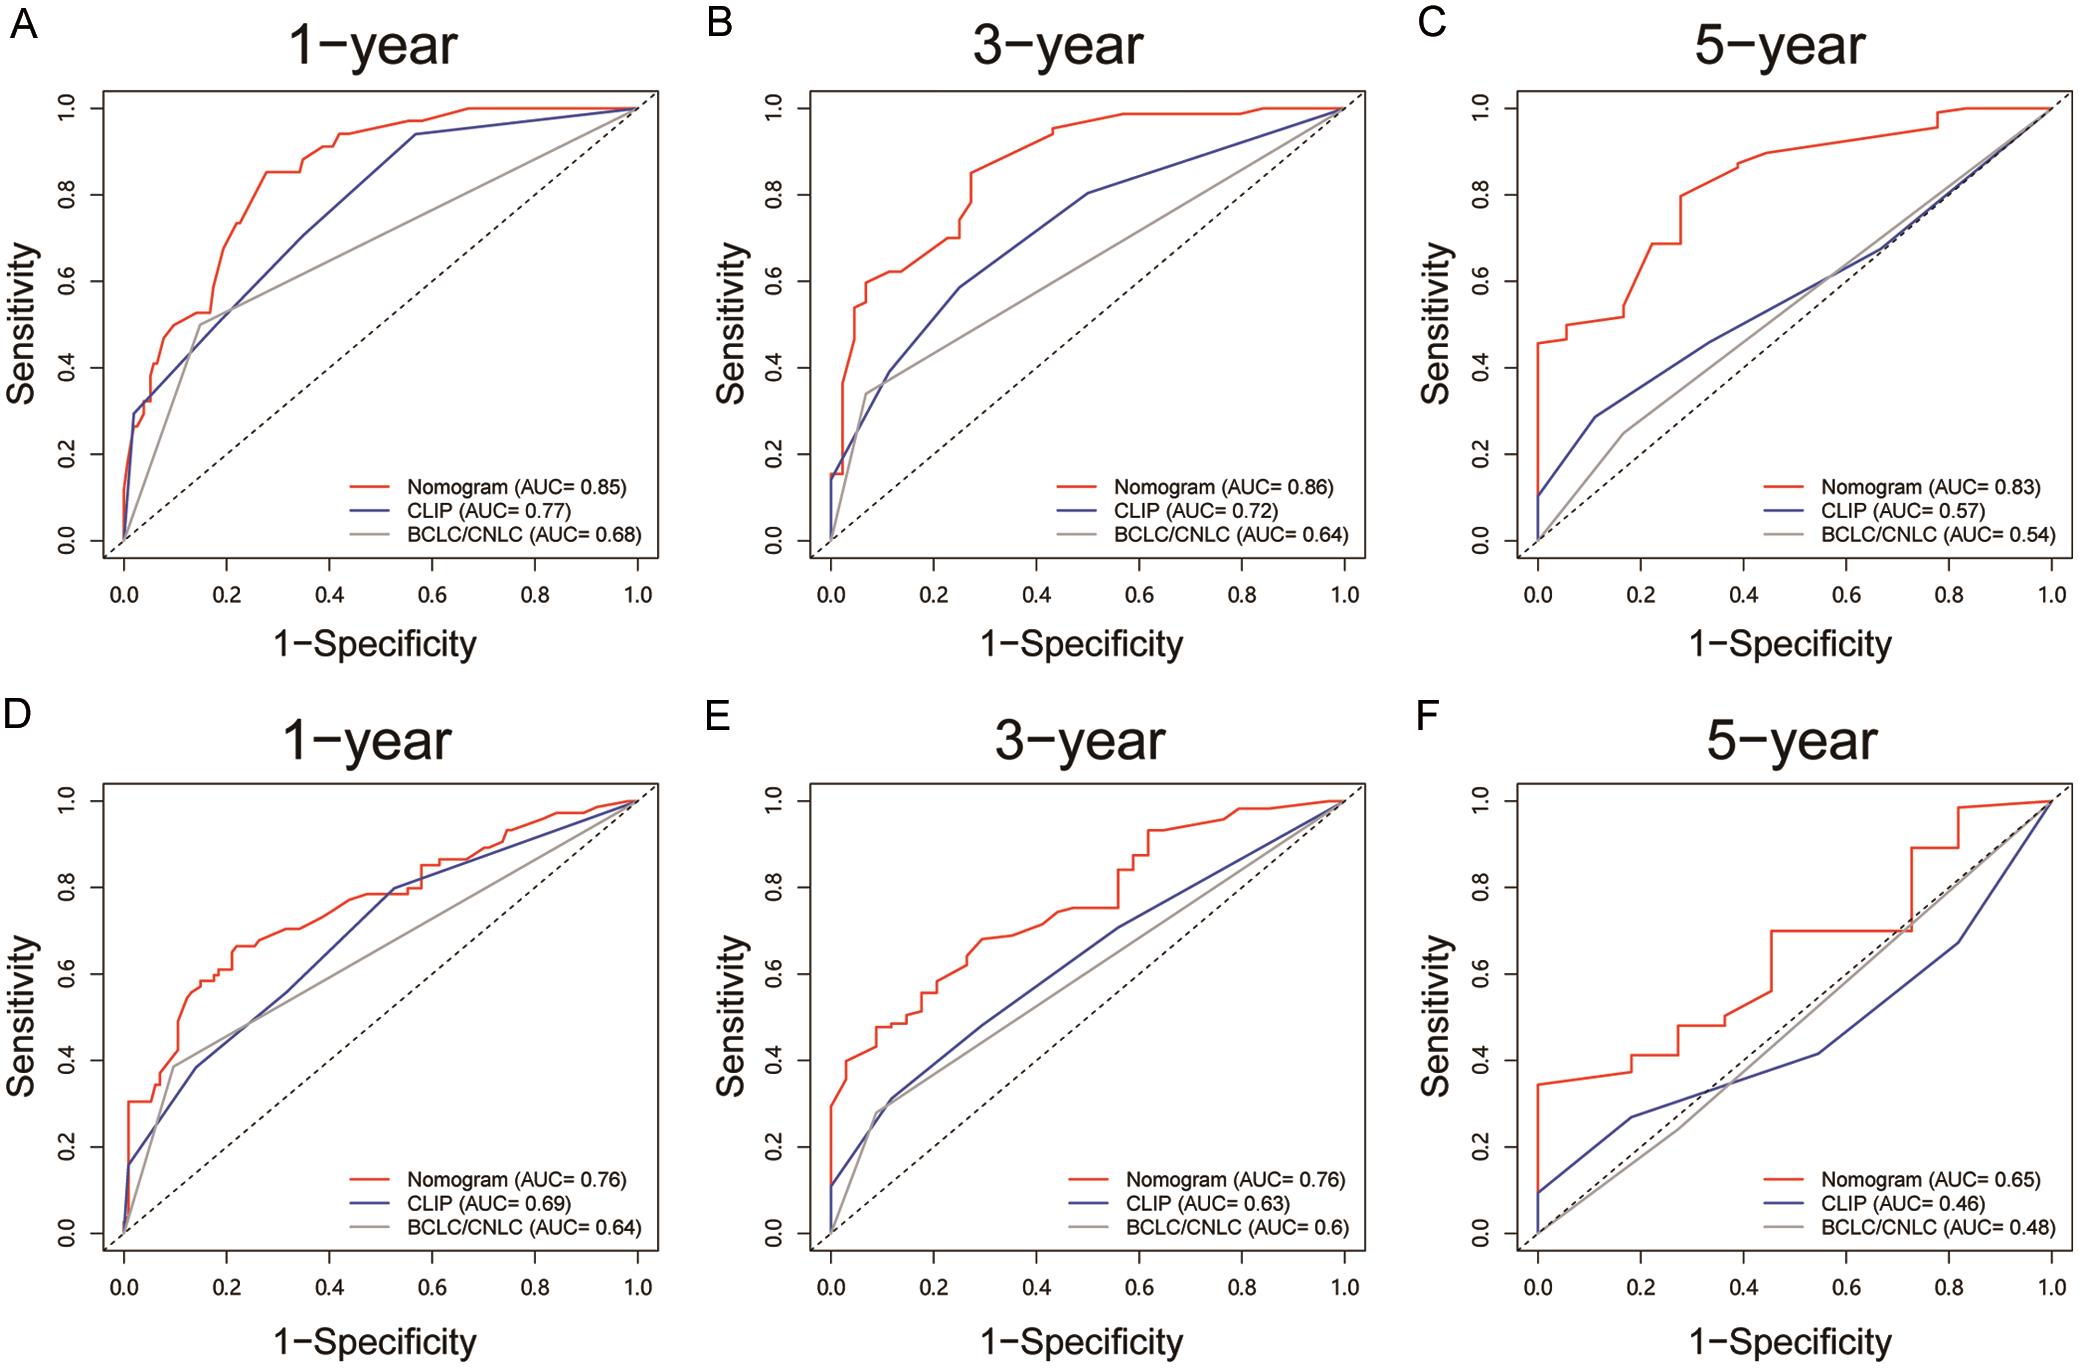 Time-dependent receiver operating characteristic (ROC) curves of nomogram and HCC staging systems.